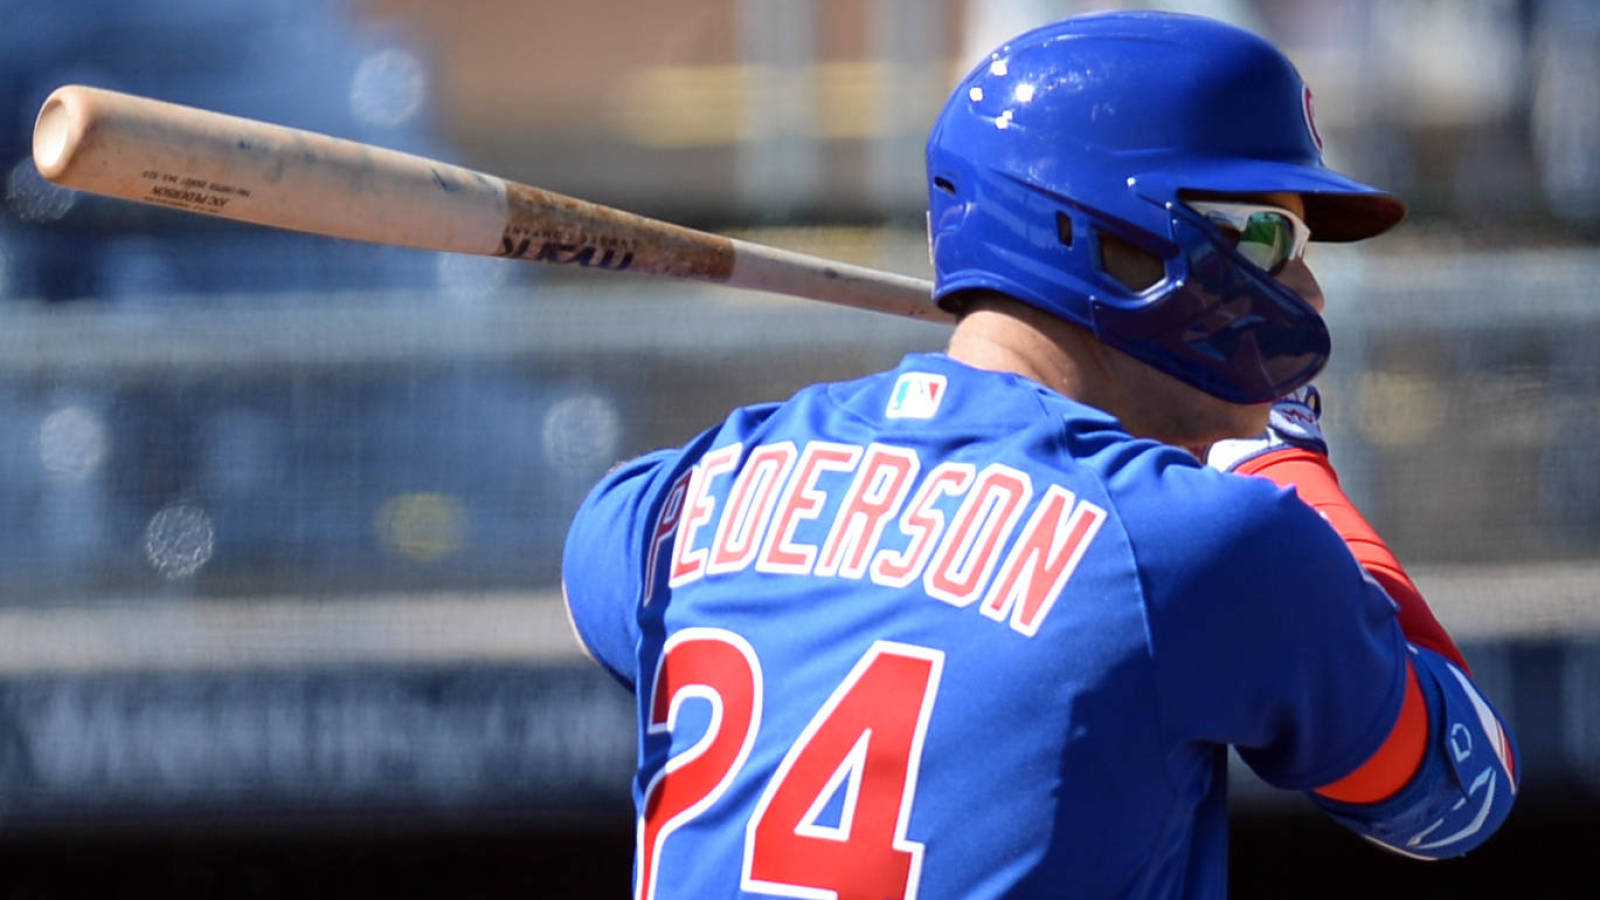 Joc Pederson joins Cubs on one-year deal